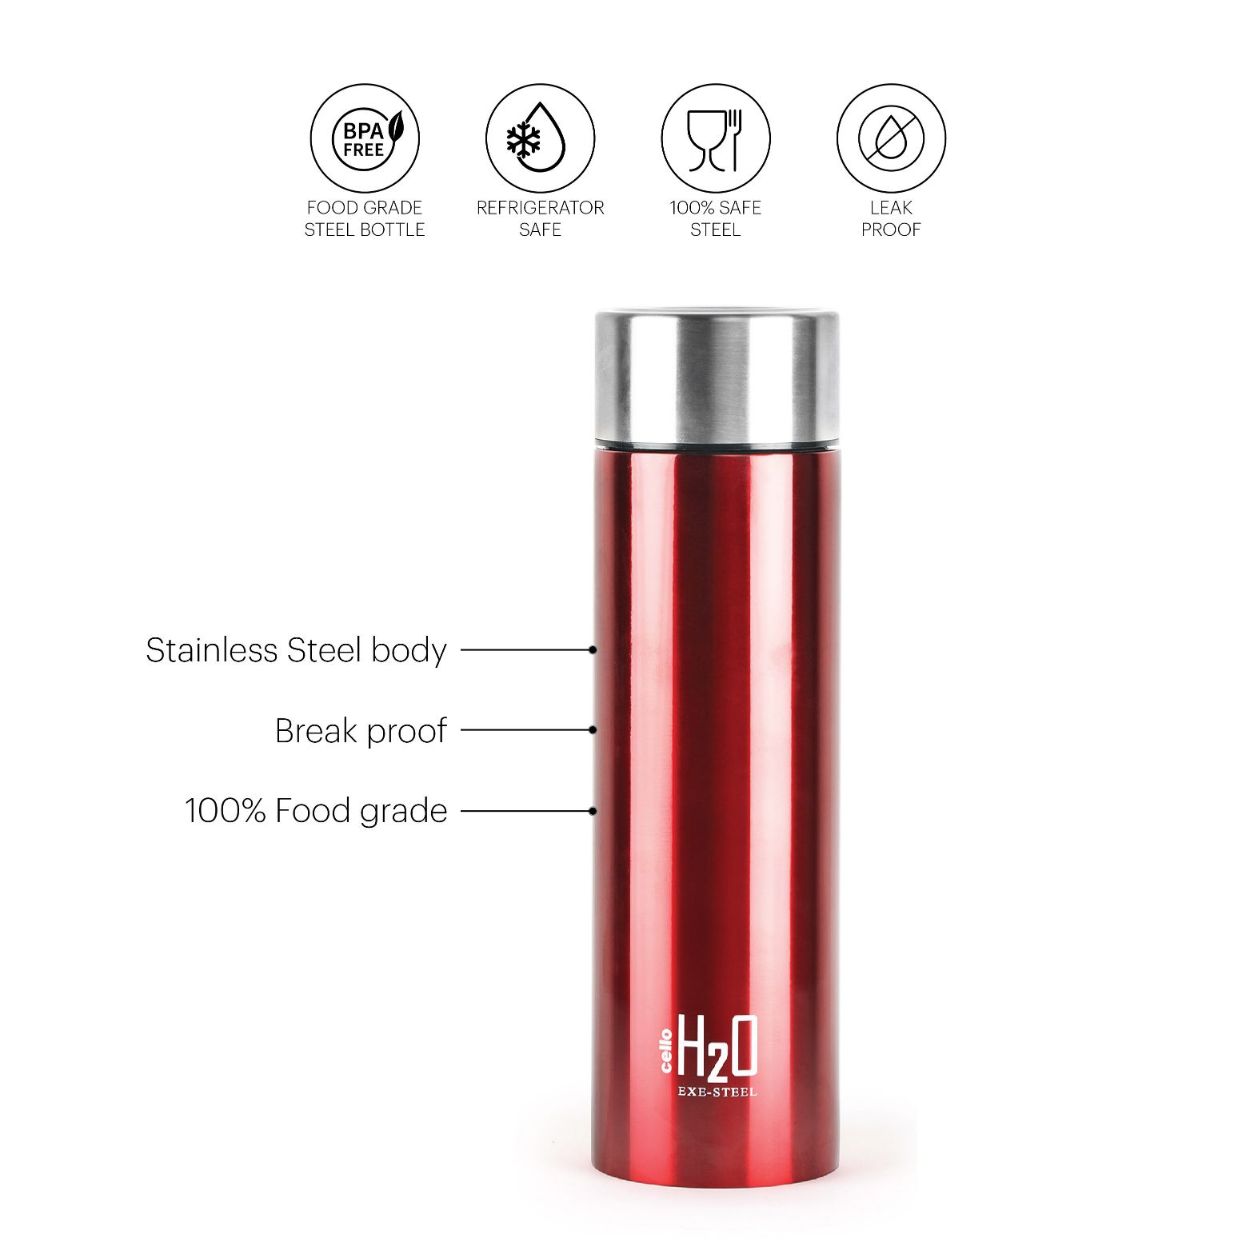 H2O Stainless Steel Water Bottle, 1000ml Red / 1000ml / 1 Piece